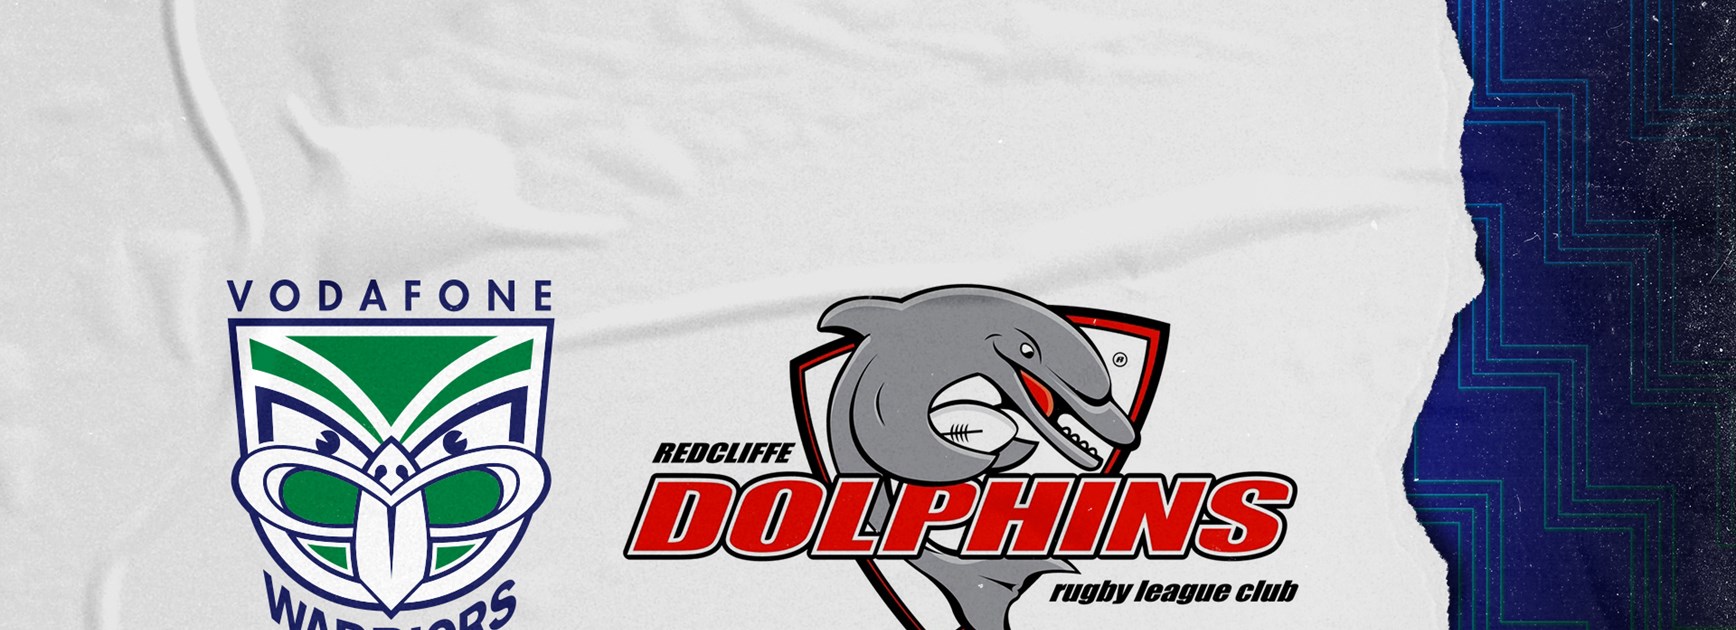 Uniting with the Dolphins